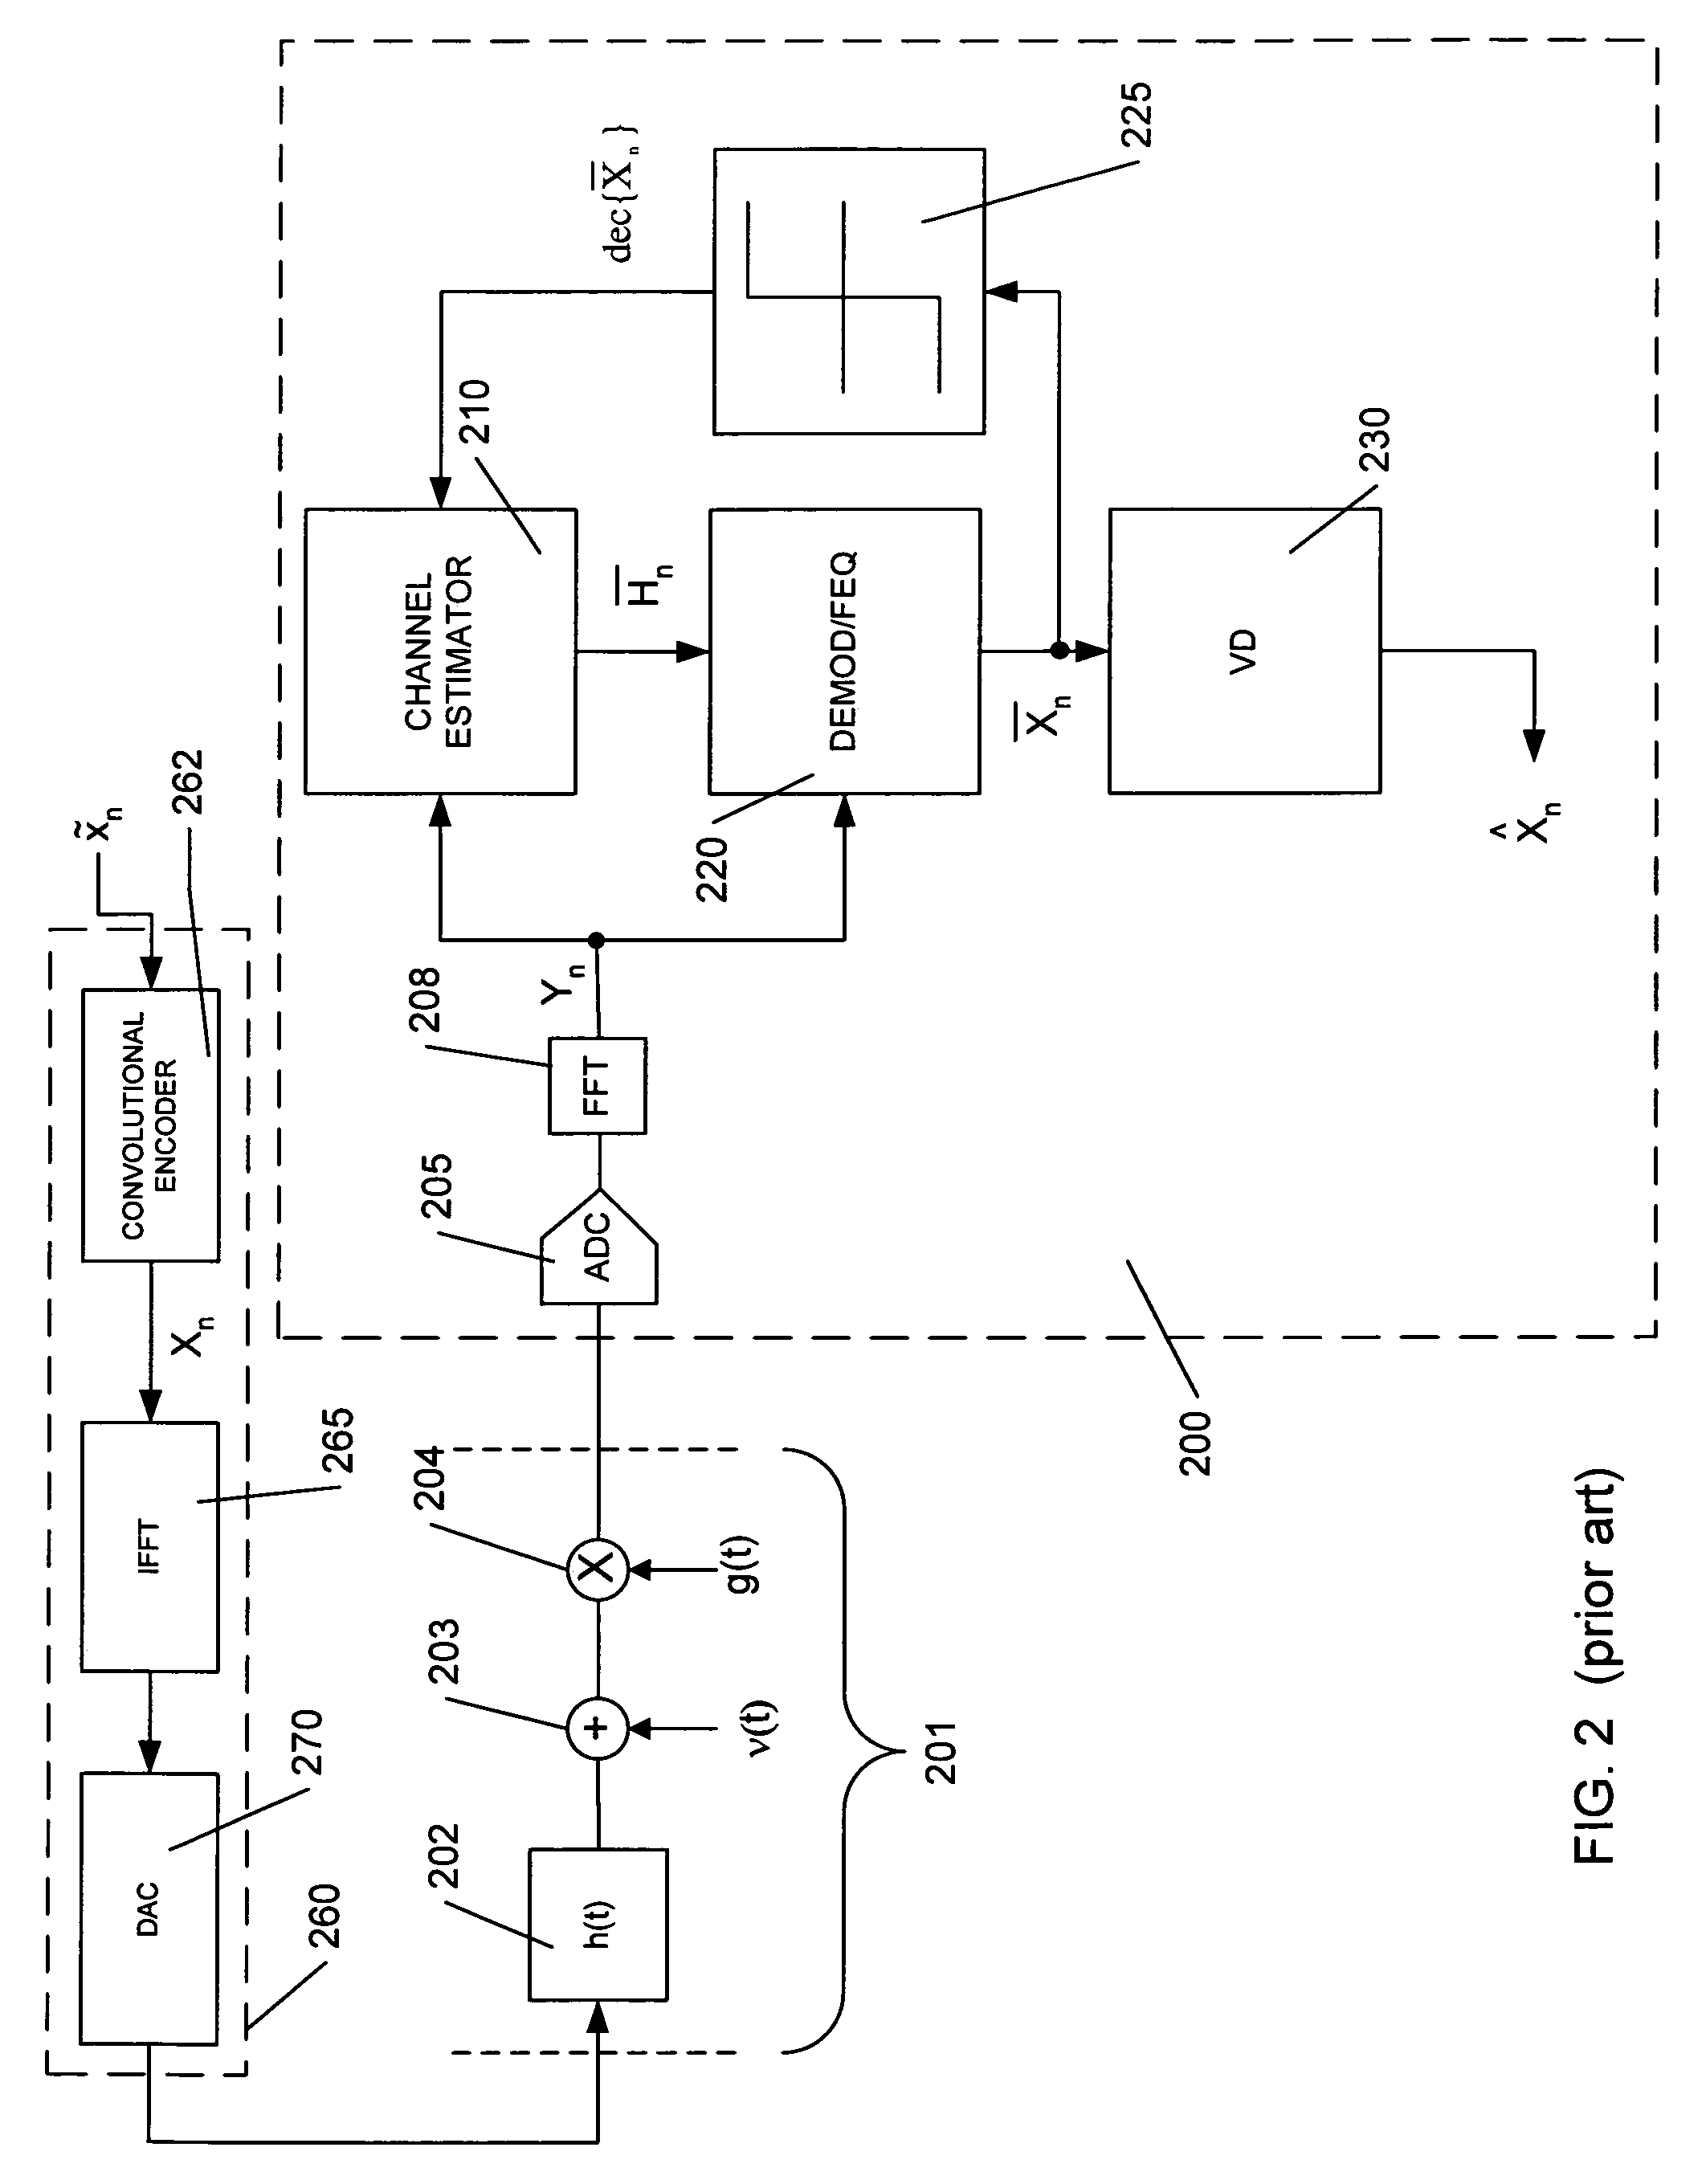 Divisionless baseband equalization in symbol modulated communications